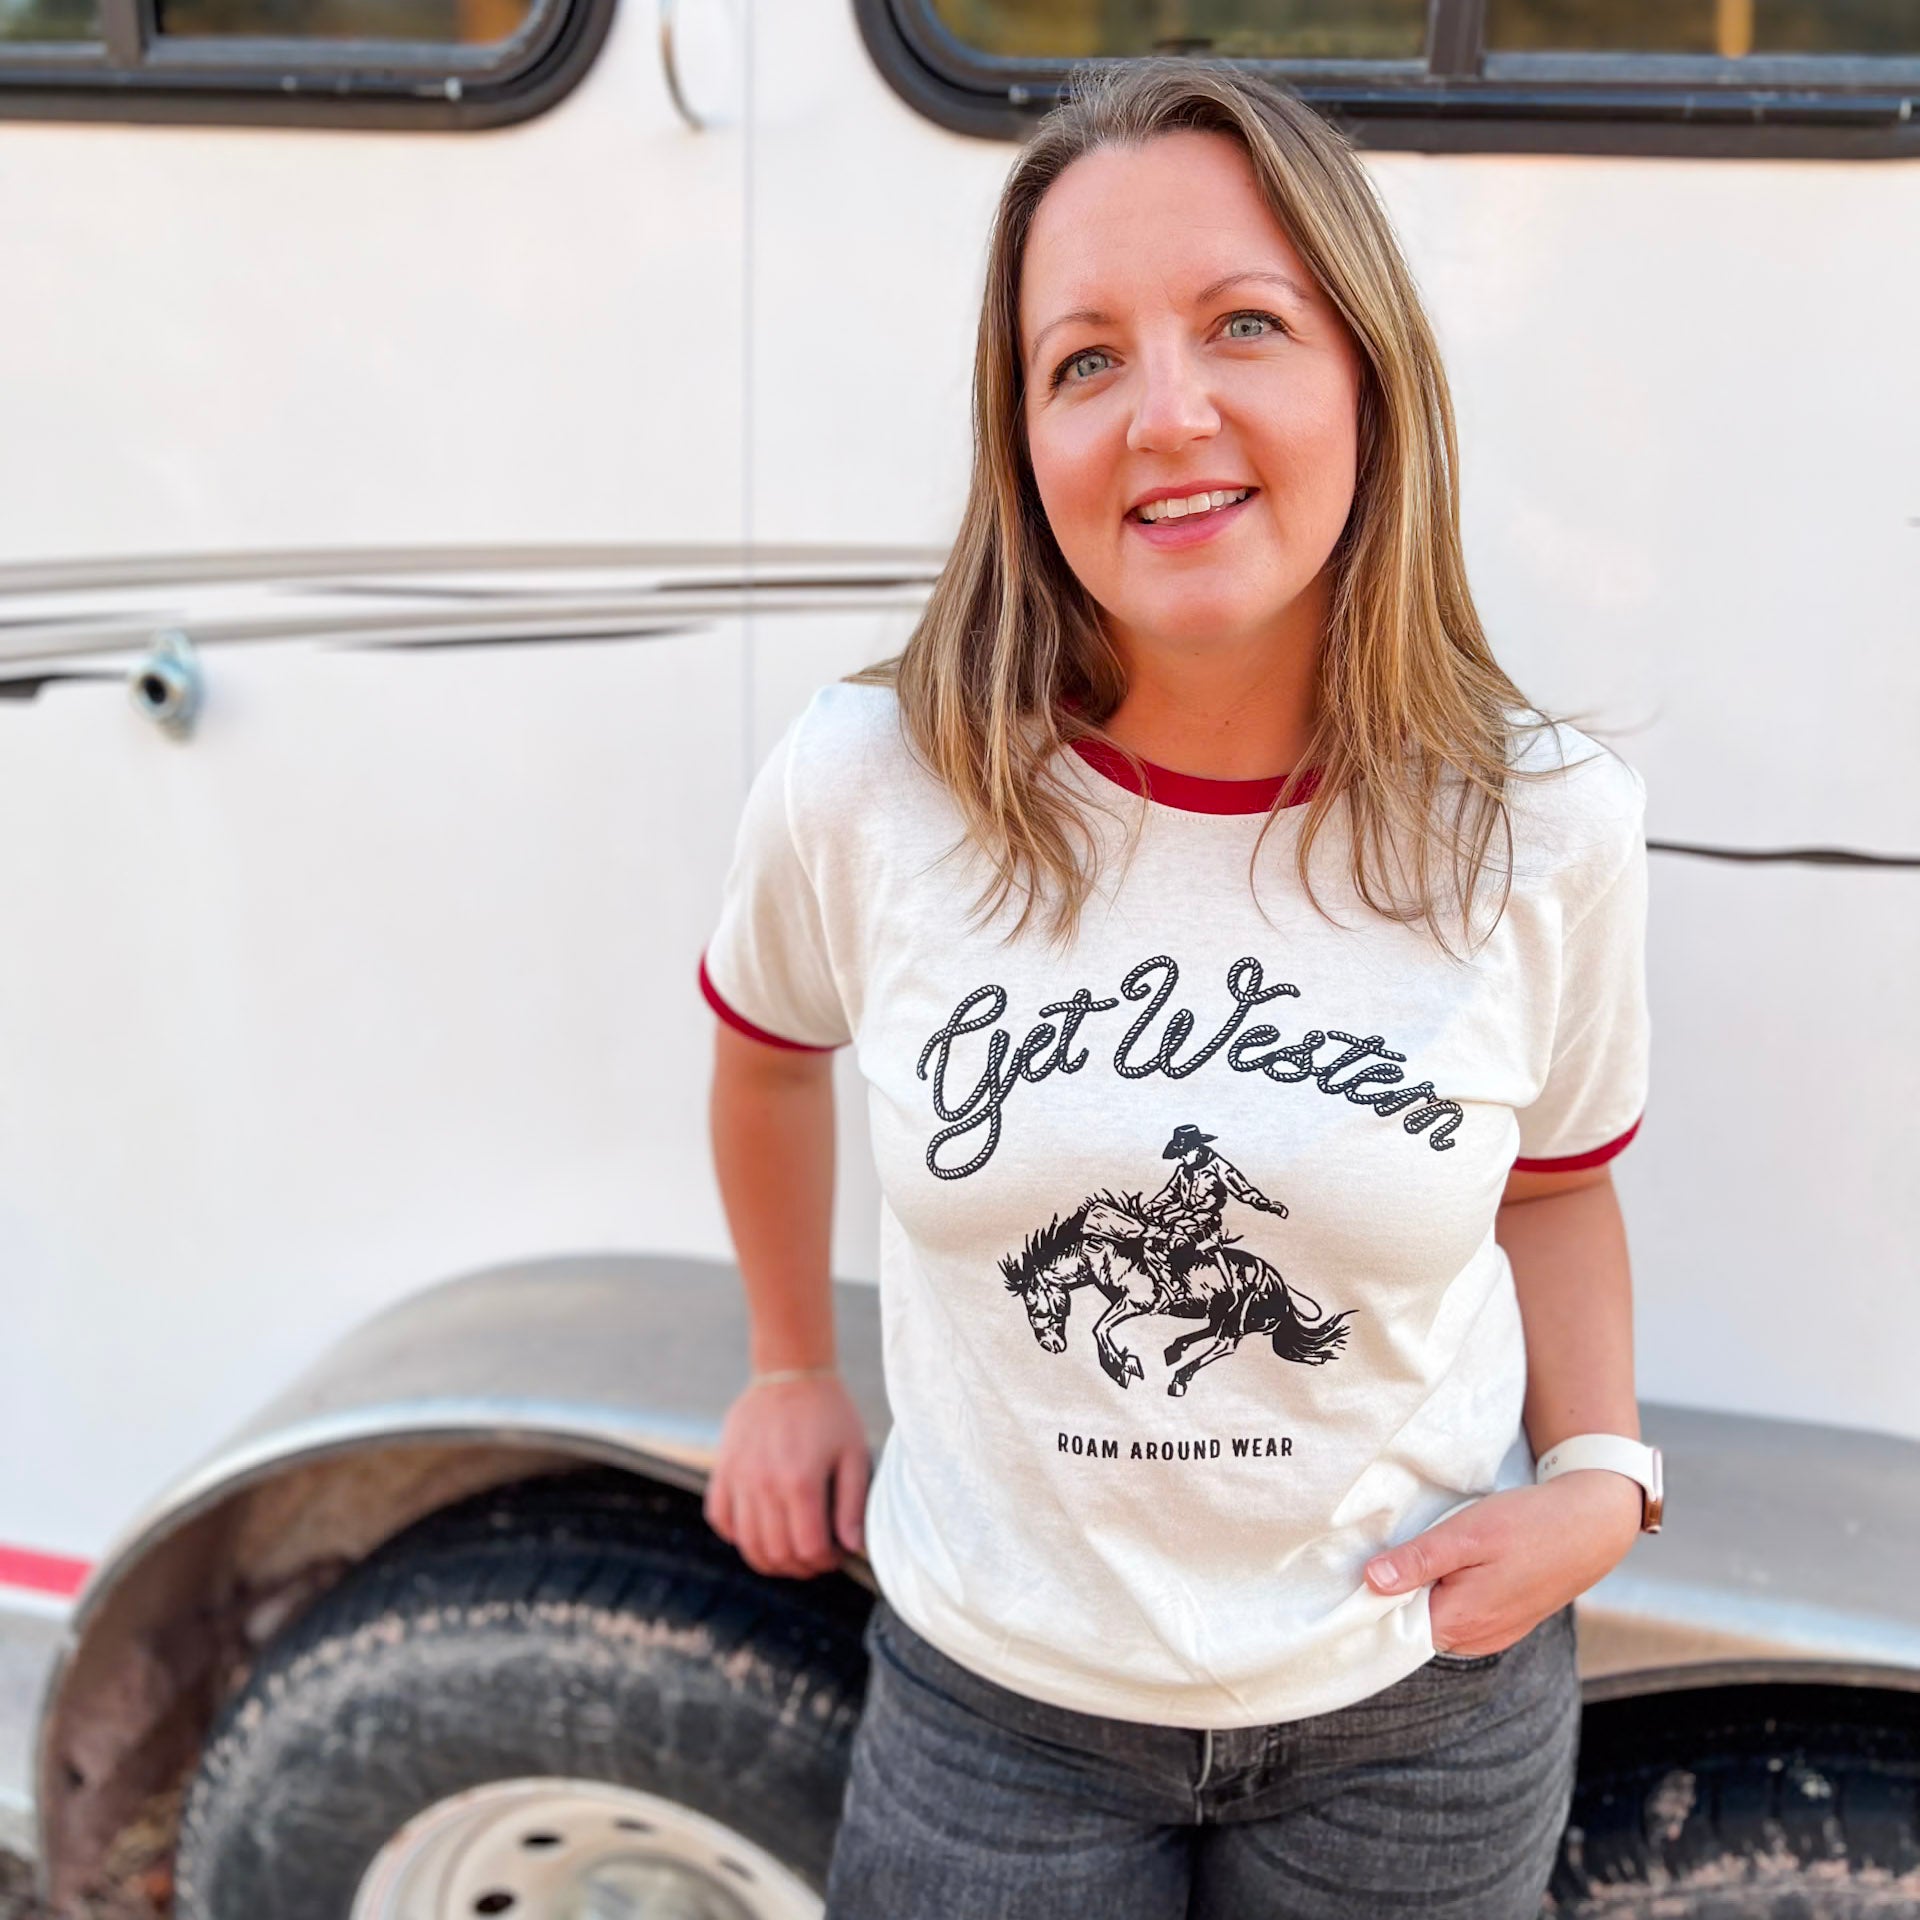 Get Western Cowboy and Rider print in black on a vintage inspired red/white unisex ringer tee. Wyoming tee. Rodeo Tee. Western t-shirt. Roam Around Wear is a Wyoming t-shirt company based out of Gillette, Wyoming